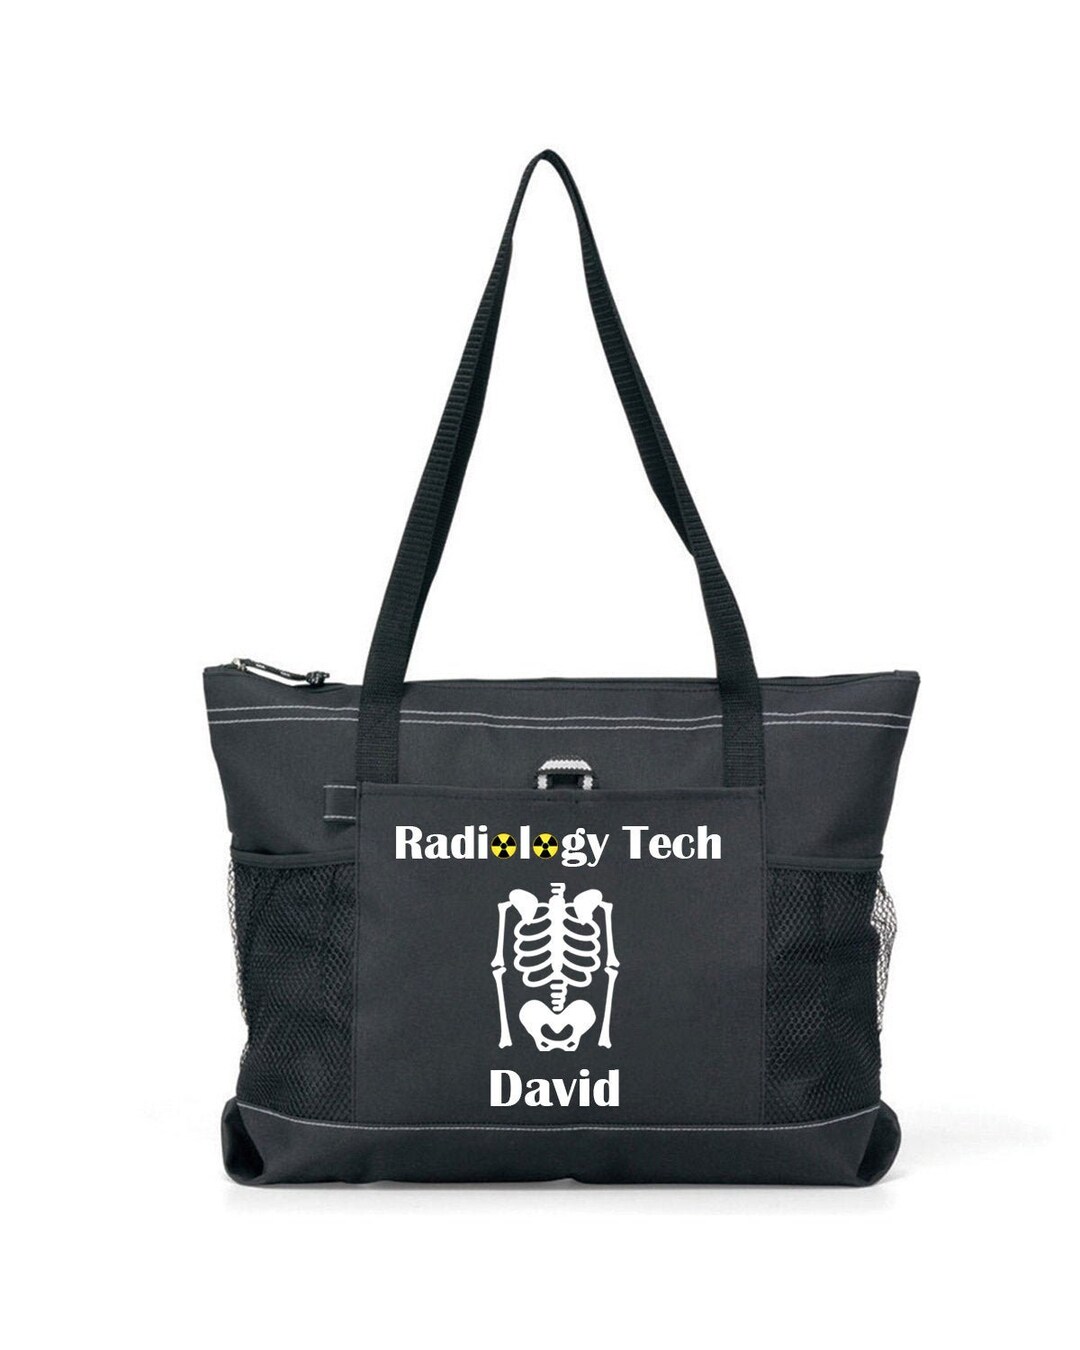 Personalized Radiology Tech Tote Bag, Available in 7 Colors 